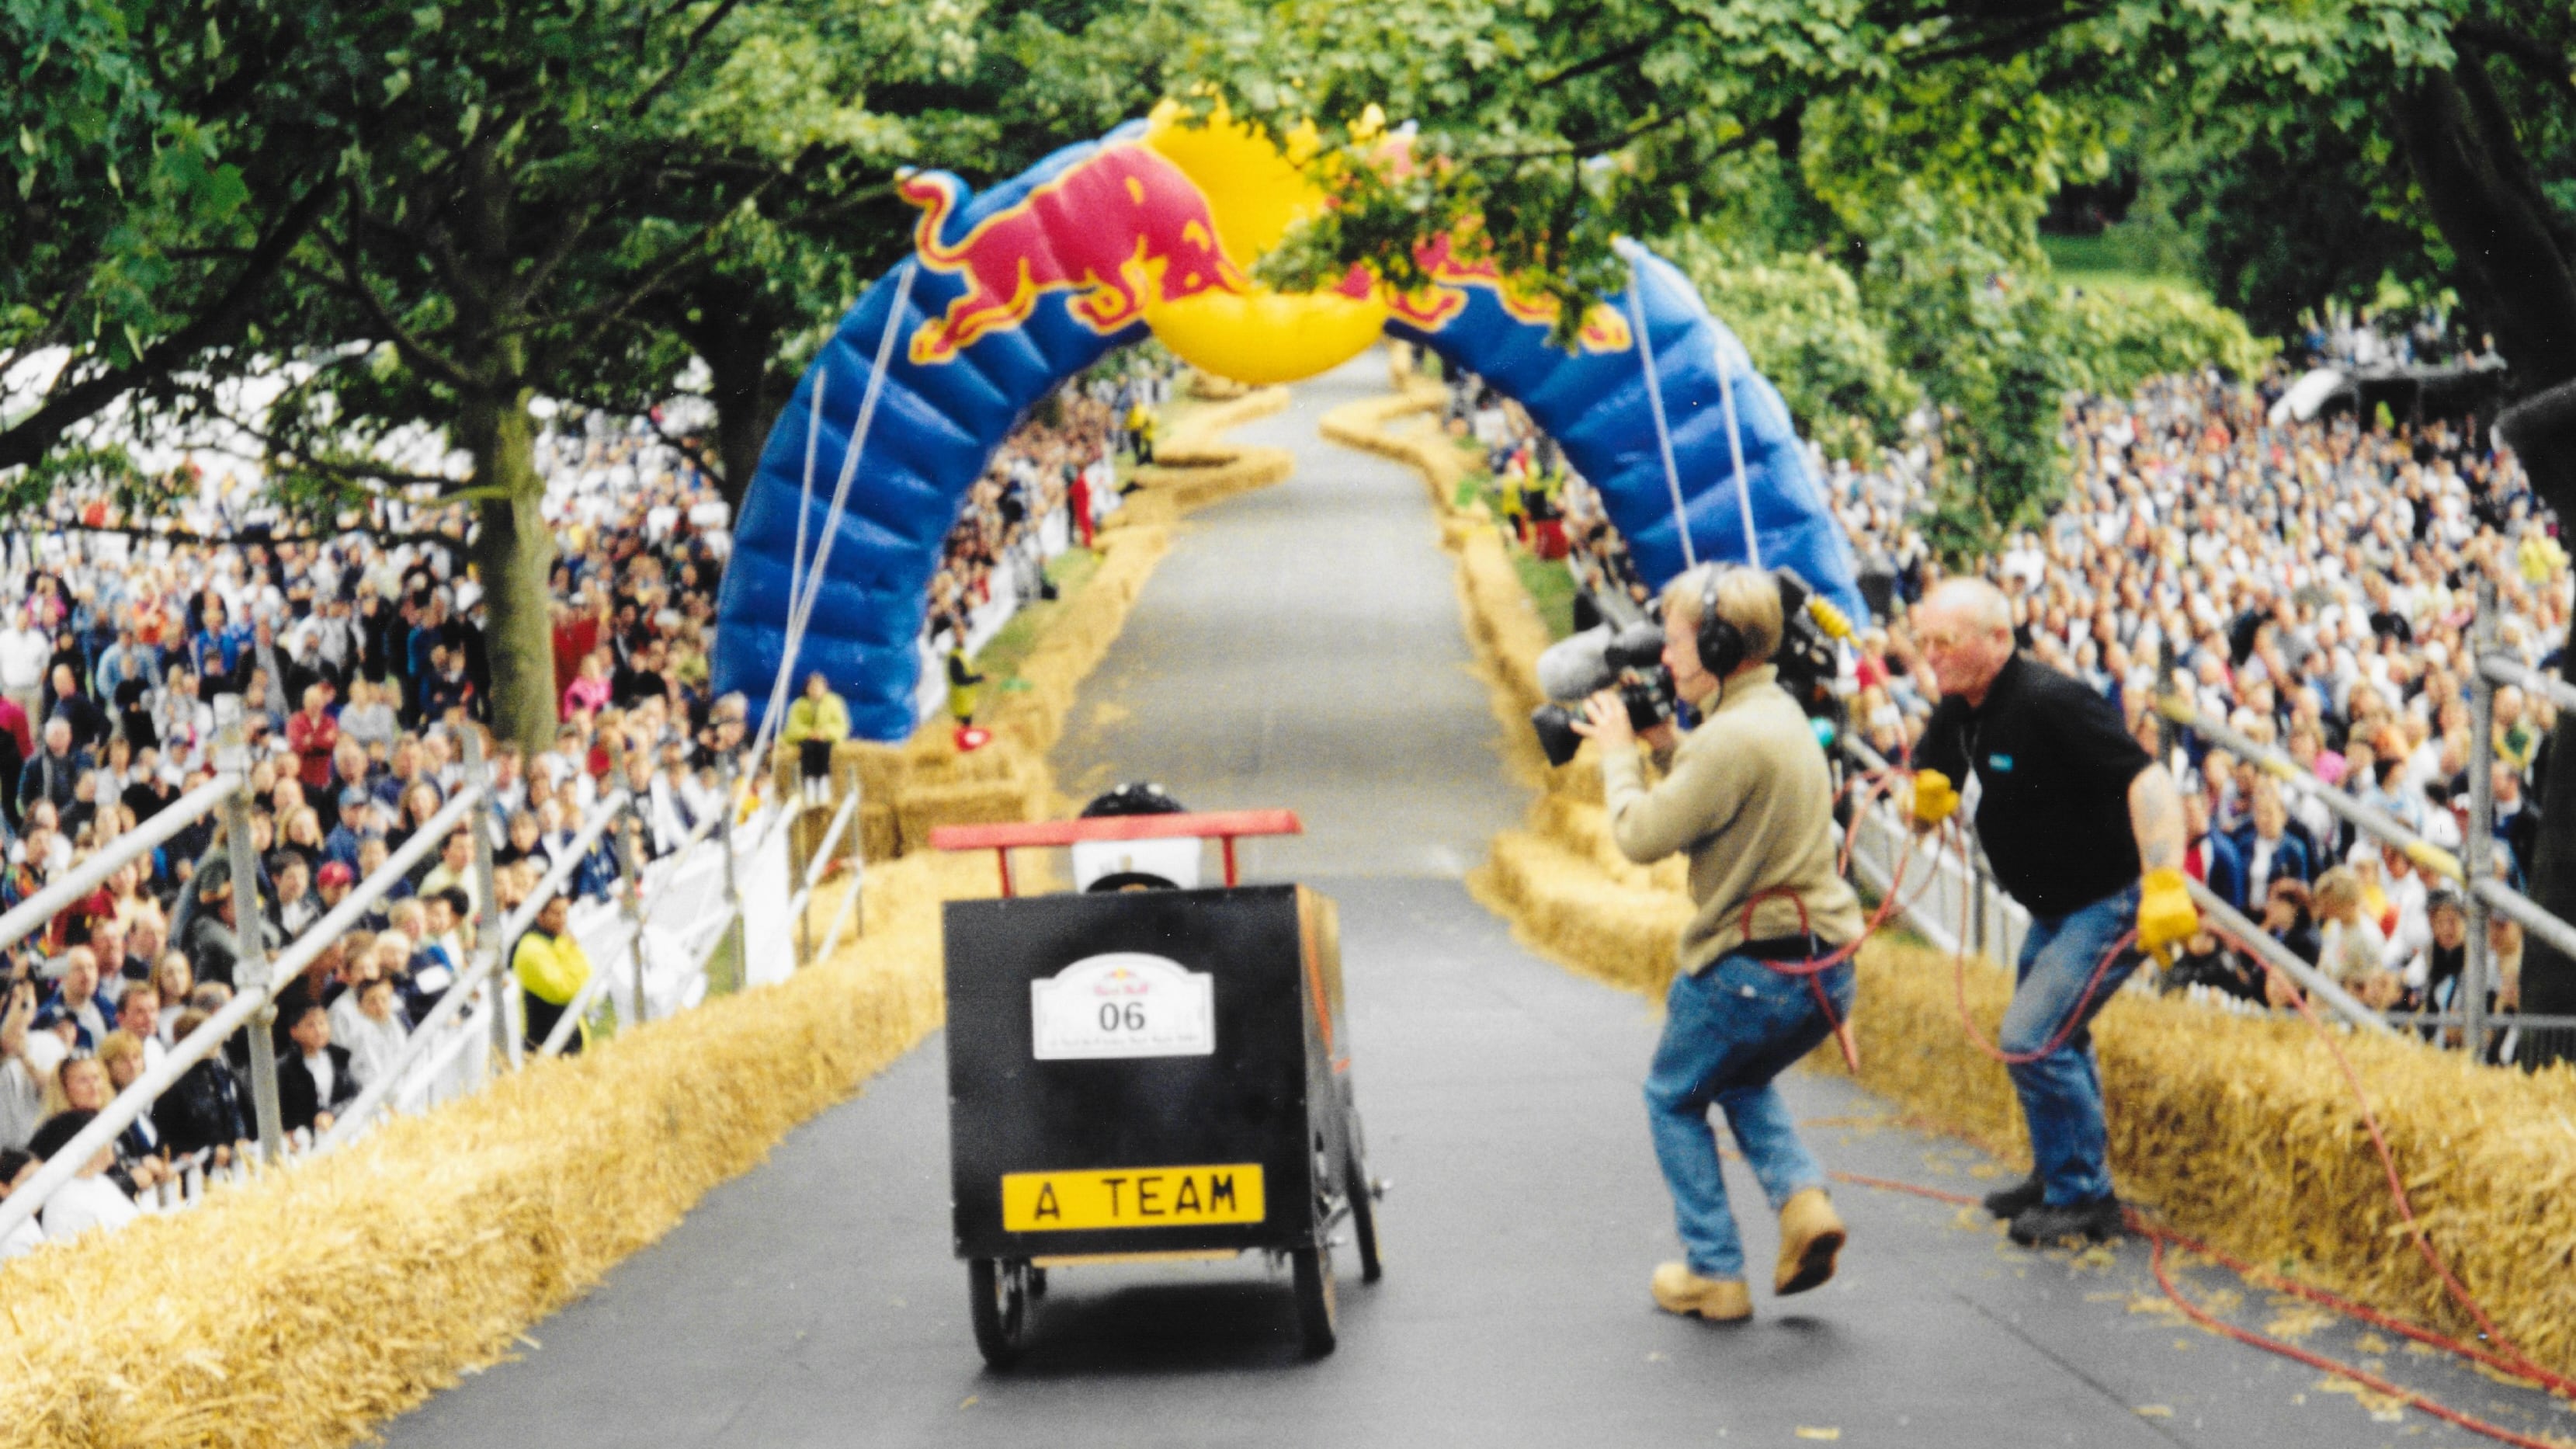 An action shot of the group’s A-Team Van at the Red Bull Soapbox Race at Roundhay Park, Leeds, in 2001